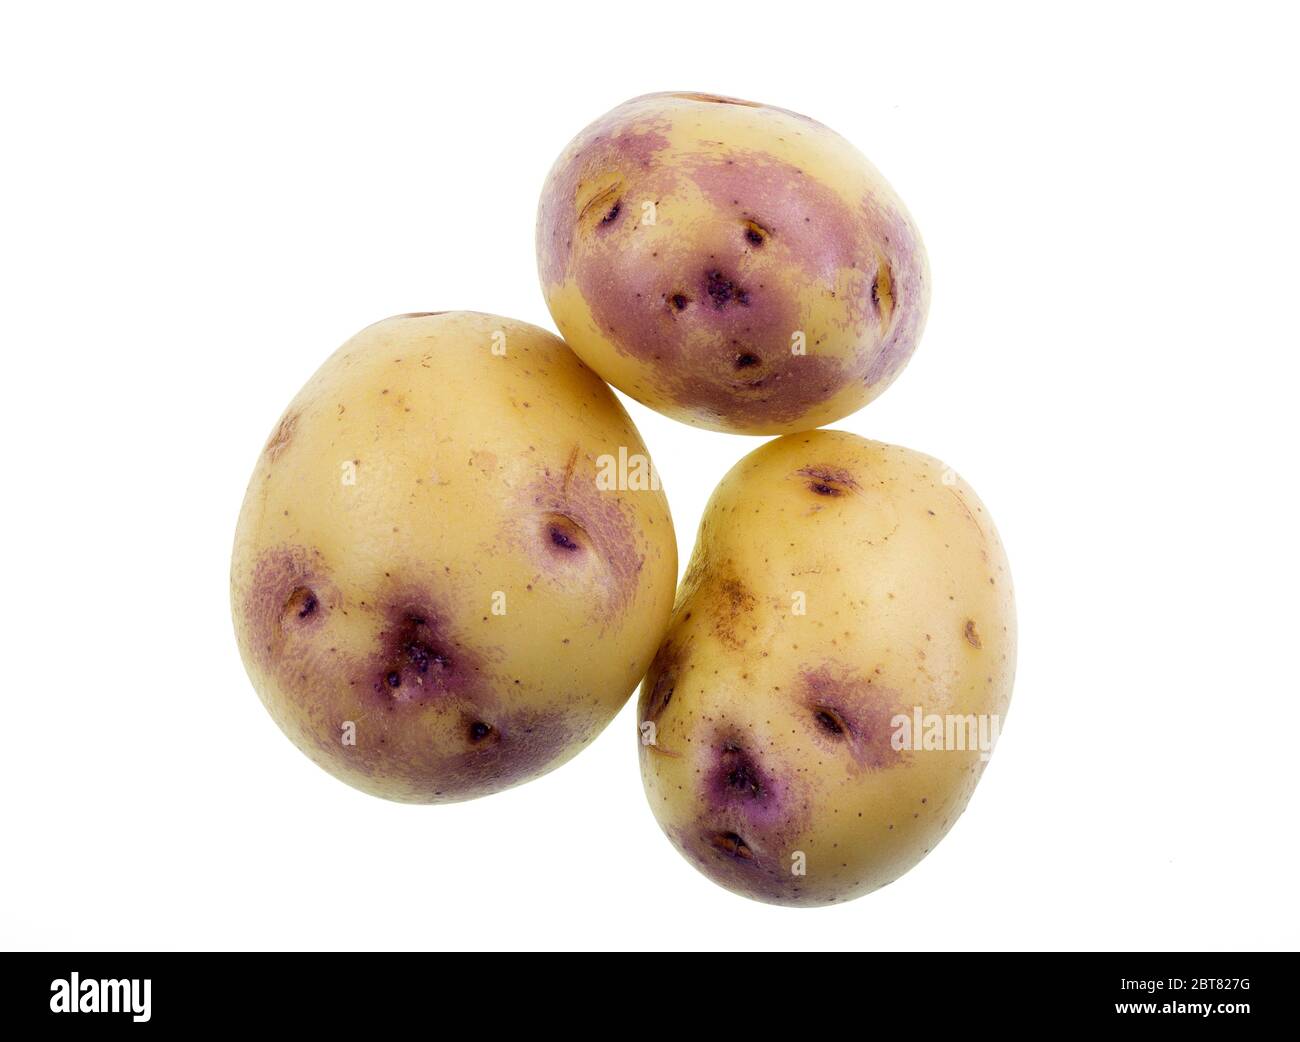 Modern variety of potato called Kestrel and known for their unique purple blush around the shallow eyes Stock Photo